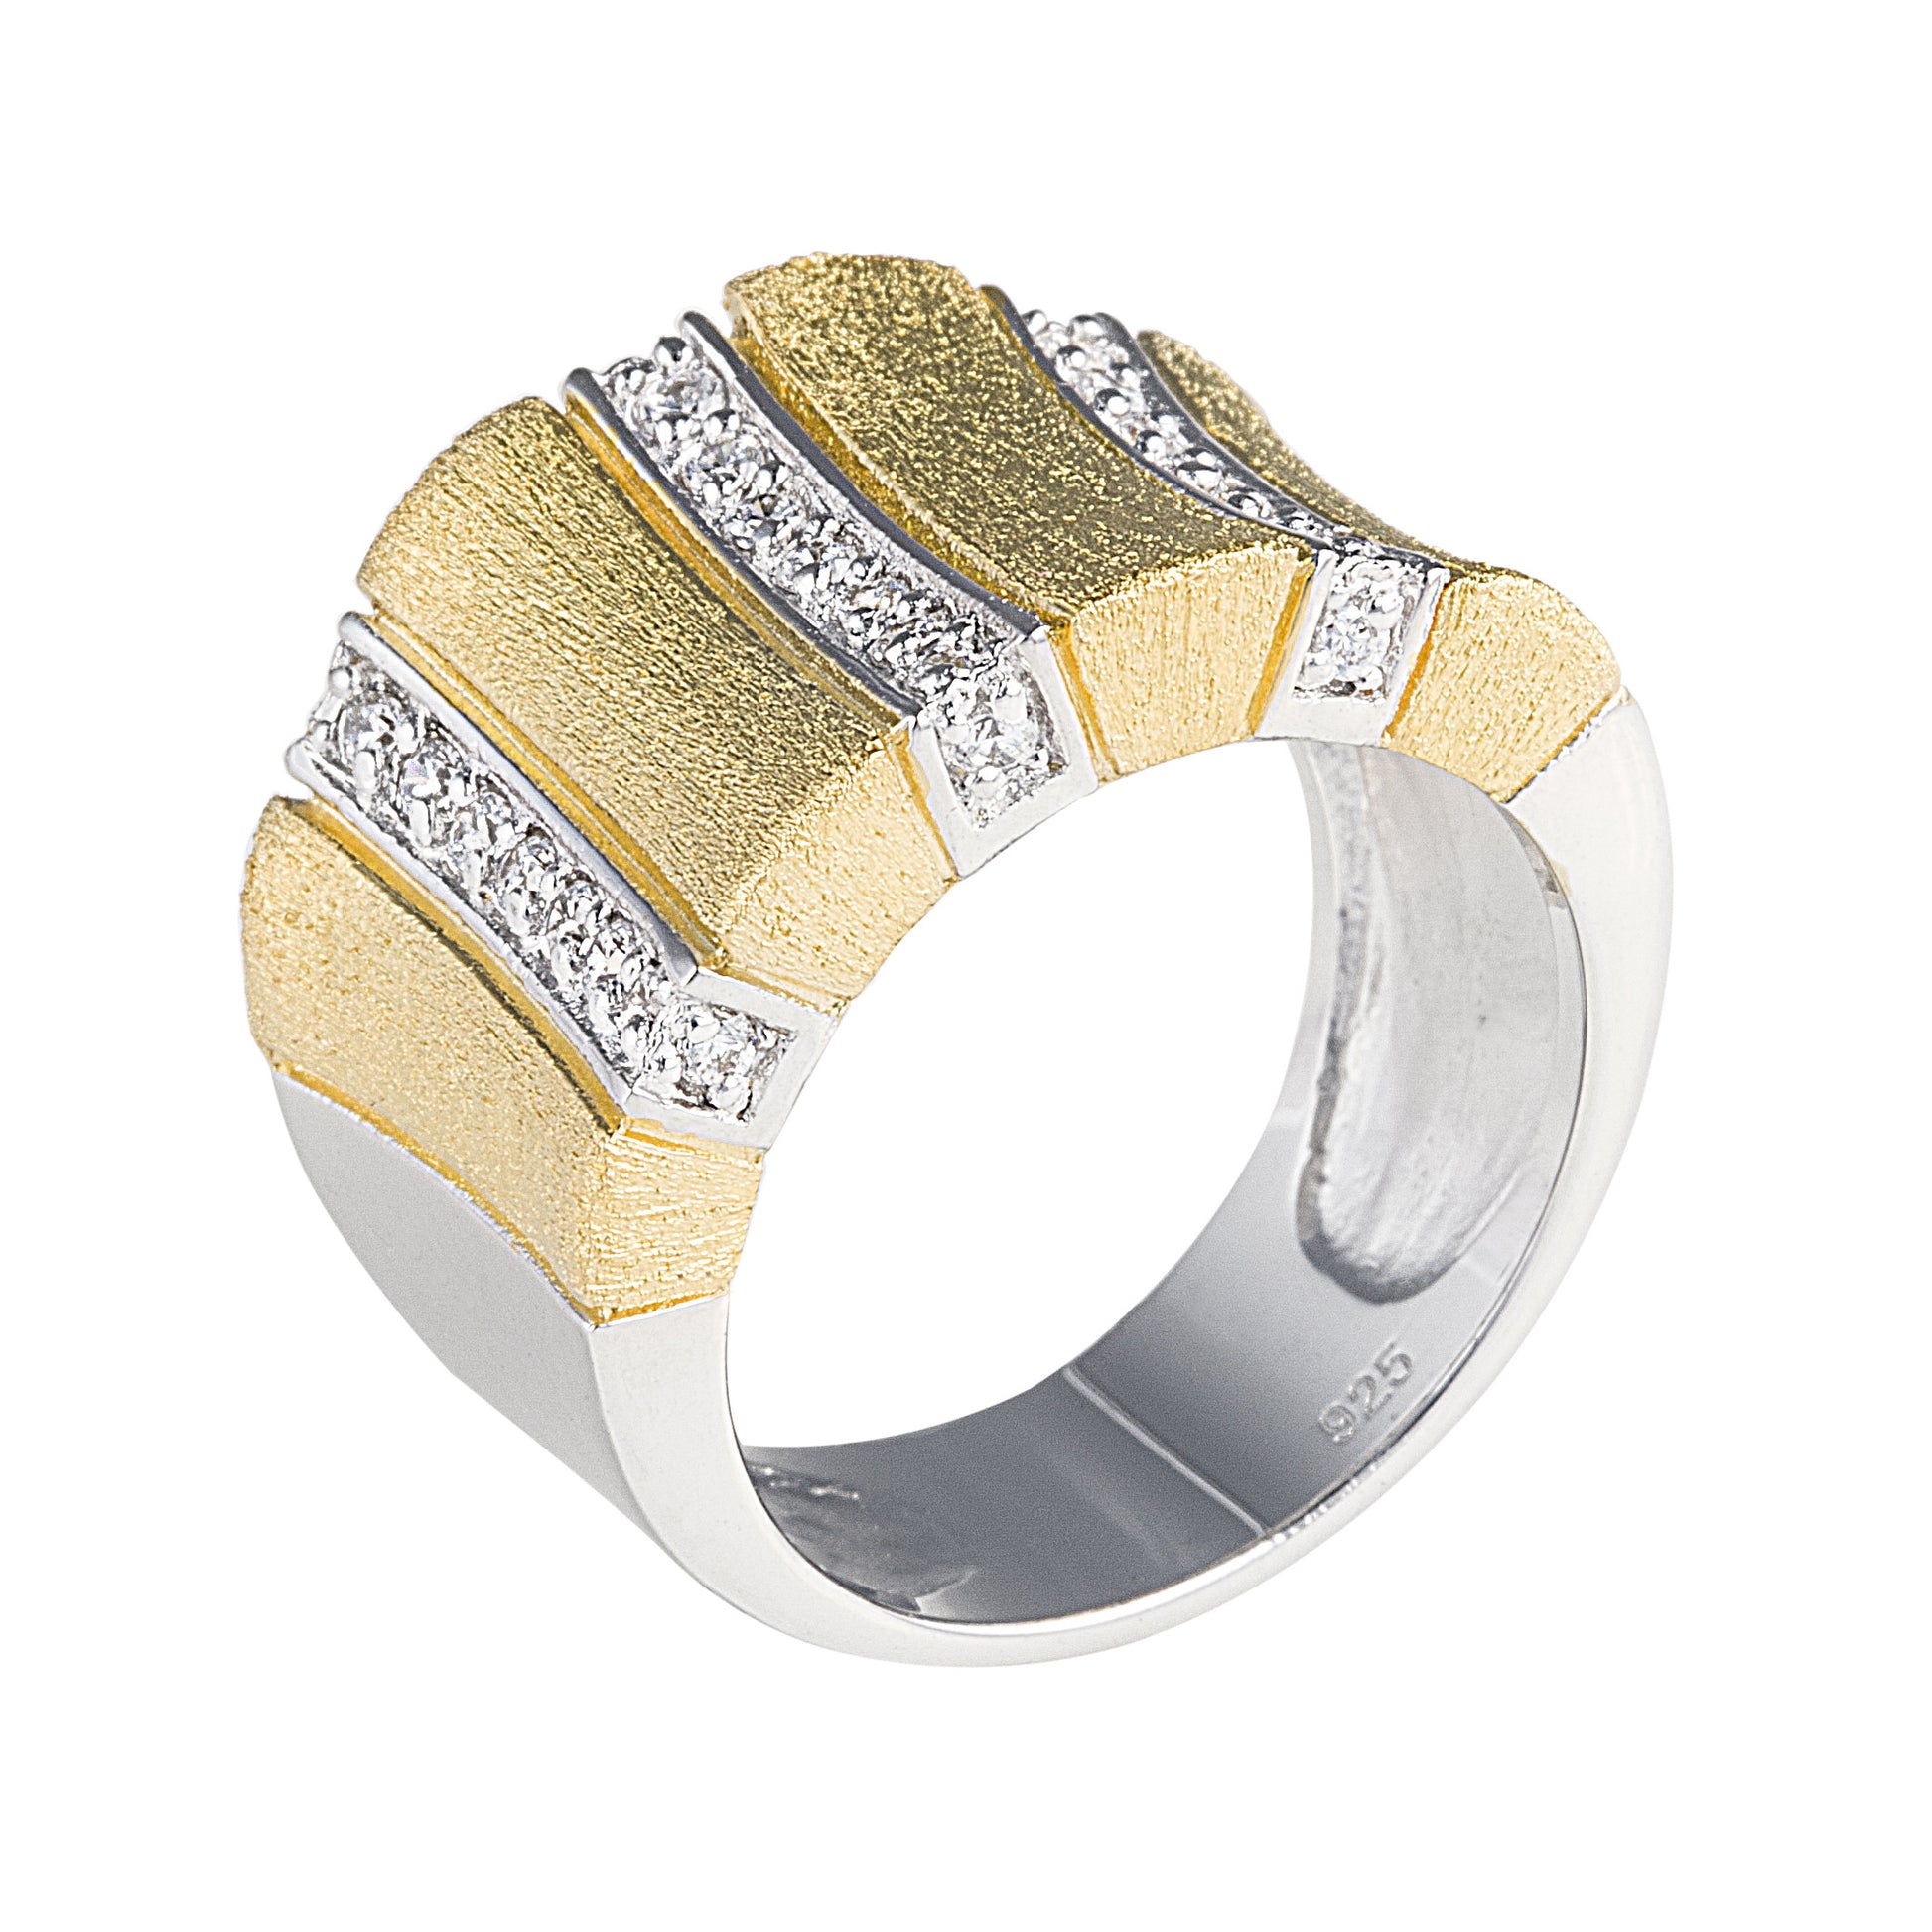 Gold Fusion Ring in 925 sterling silver with brushed gold overlay in a mix of gold and silver with 3 rows of cubic zirconia. Worldwide shipping. Affordable luxury jewellery by Bellagio & Co.